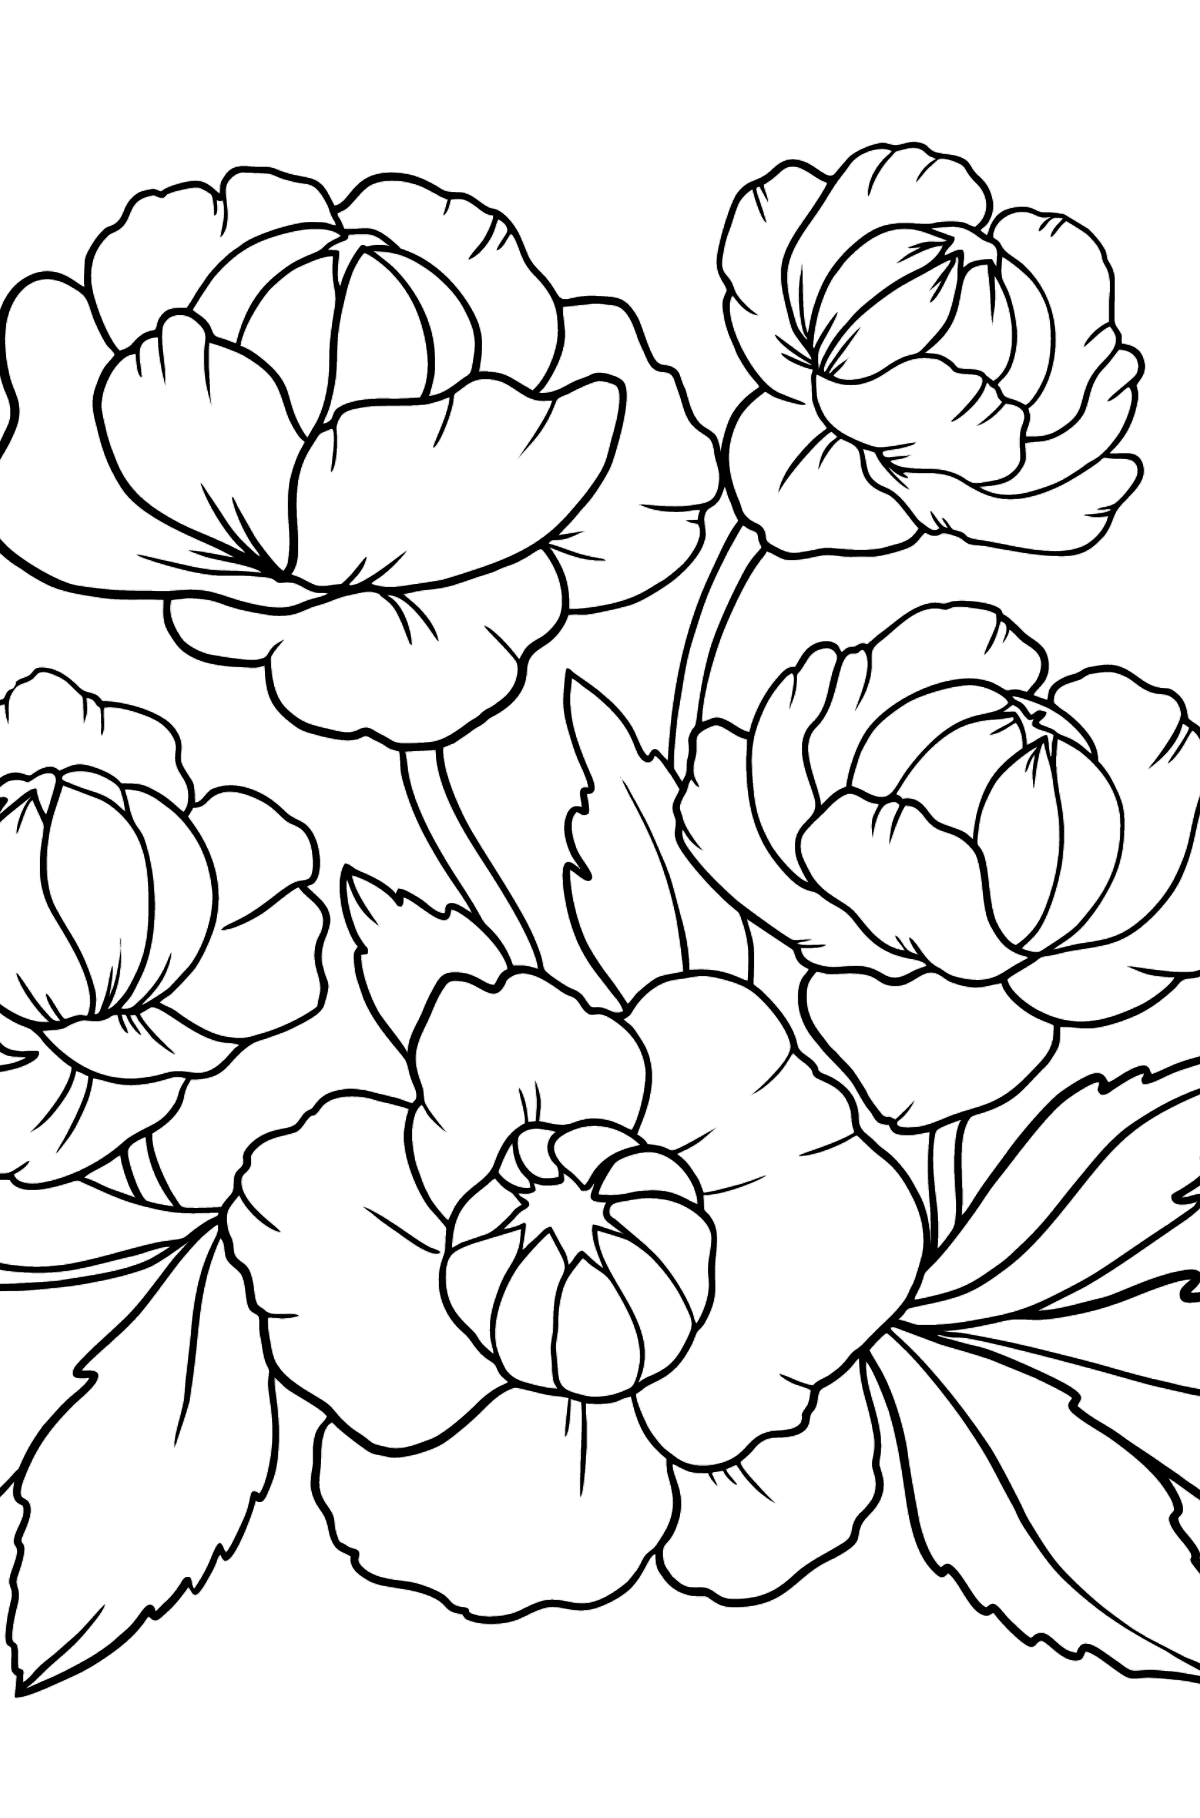 Beautiful Flower Coloring Page - A Red and Pink Globeflower - Coloring Pages for Kids